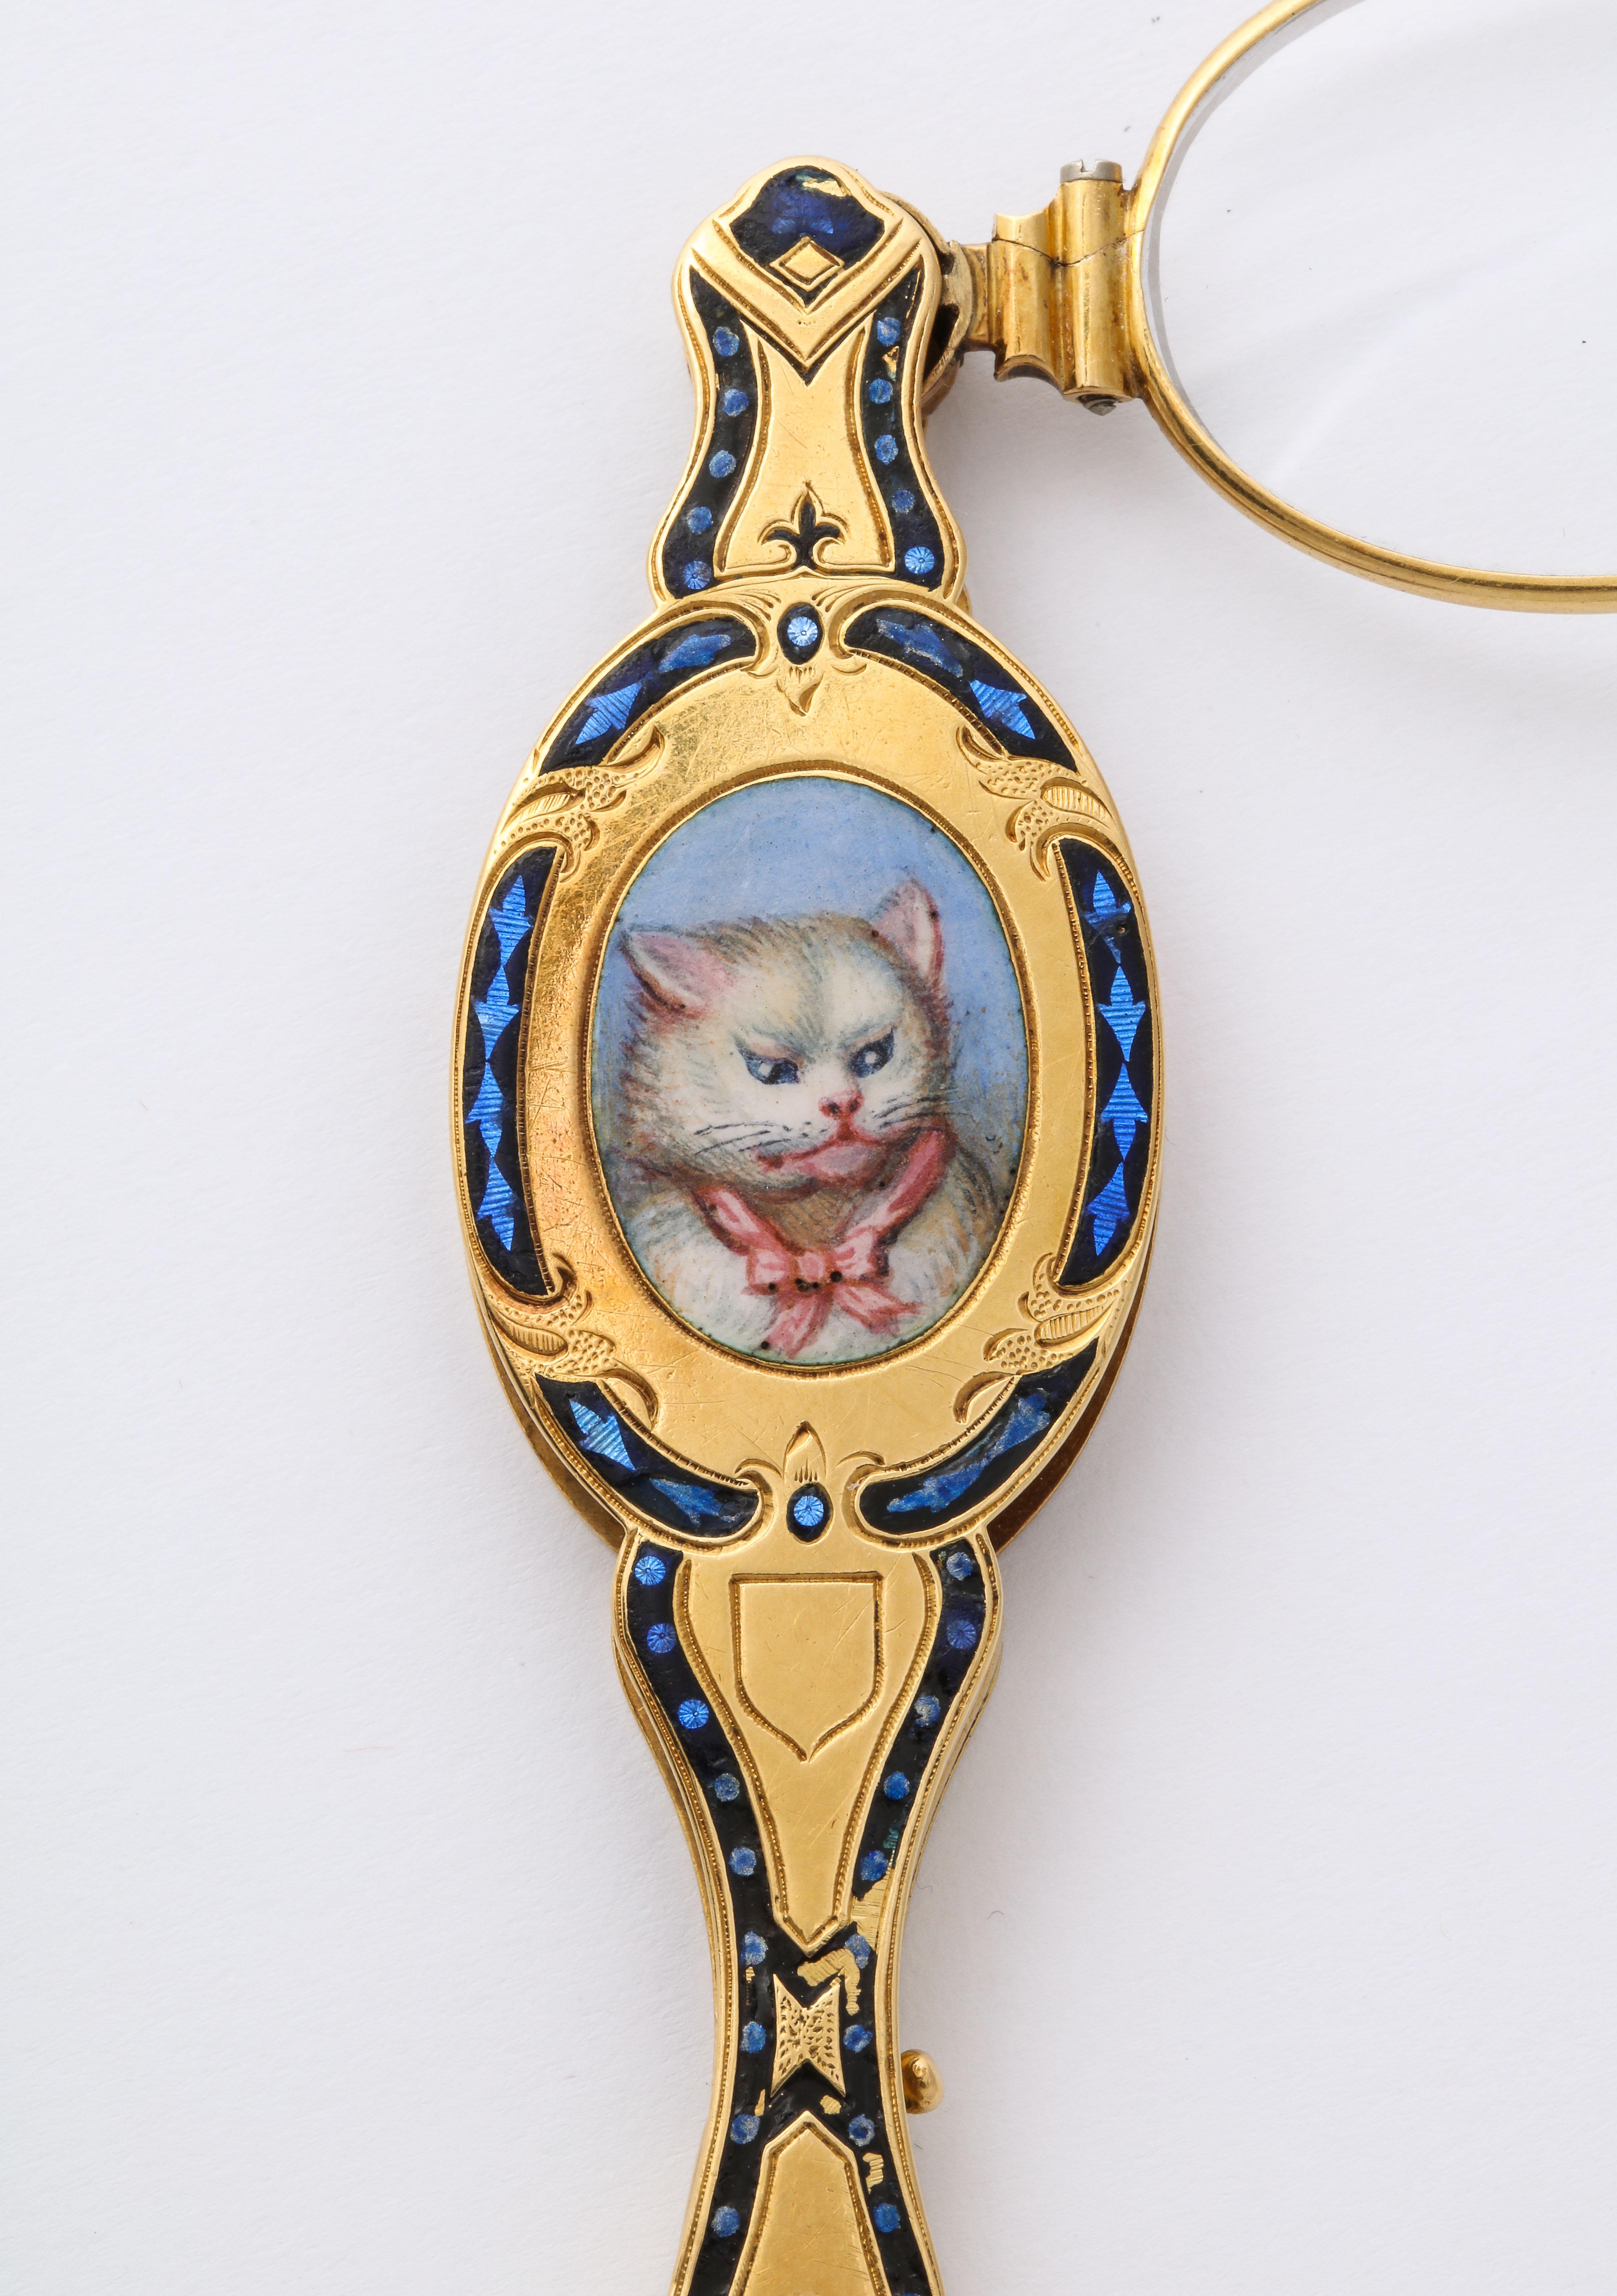 Rare as a needle in a haystack, a luxurious two sided lorgnette in 18 Kt gold and enamel, one side an enamel painting of a suspicious feline in white with blue eyes, while on the other side a scrolling vine and floral all over pattern. Your eye